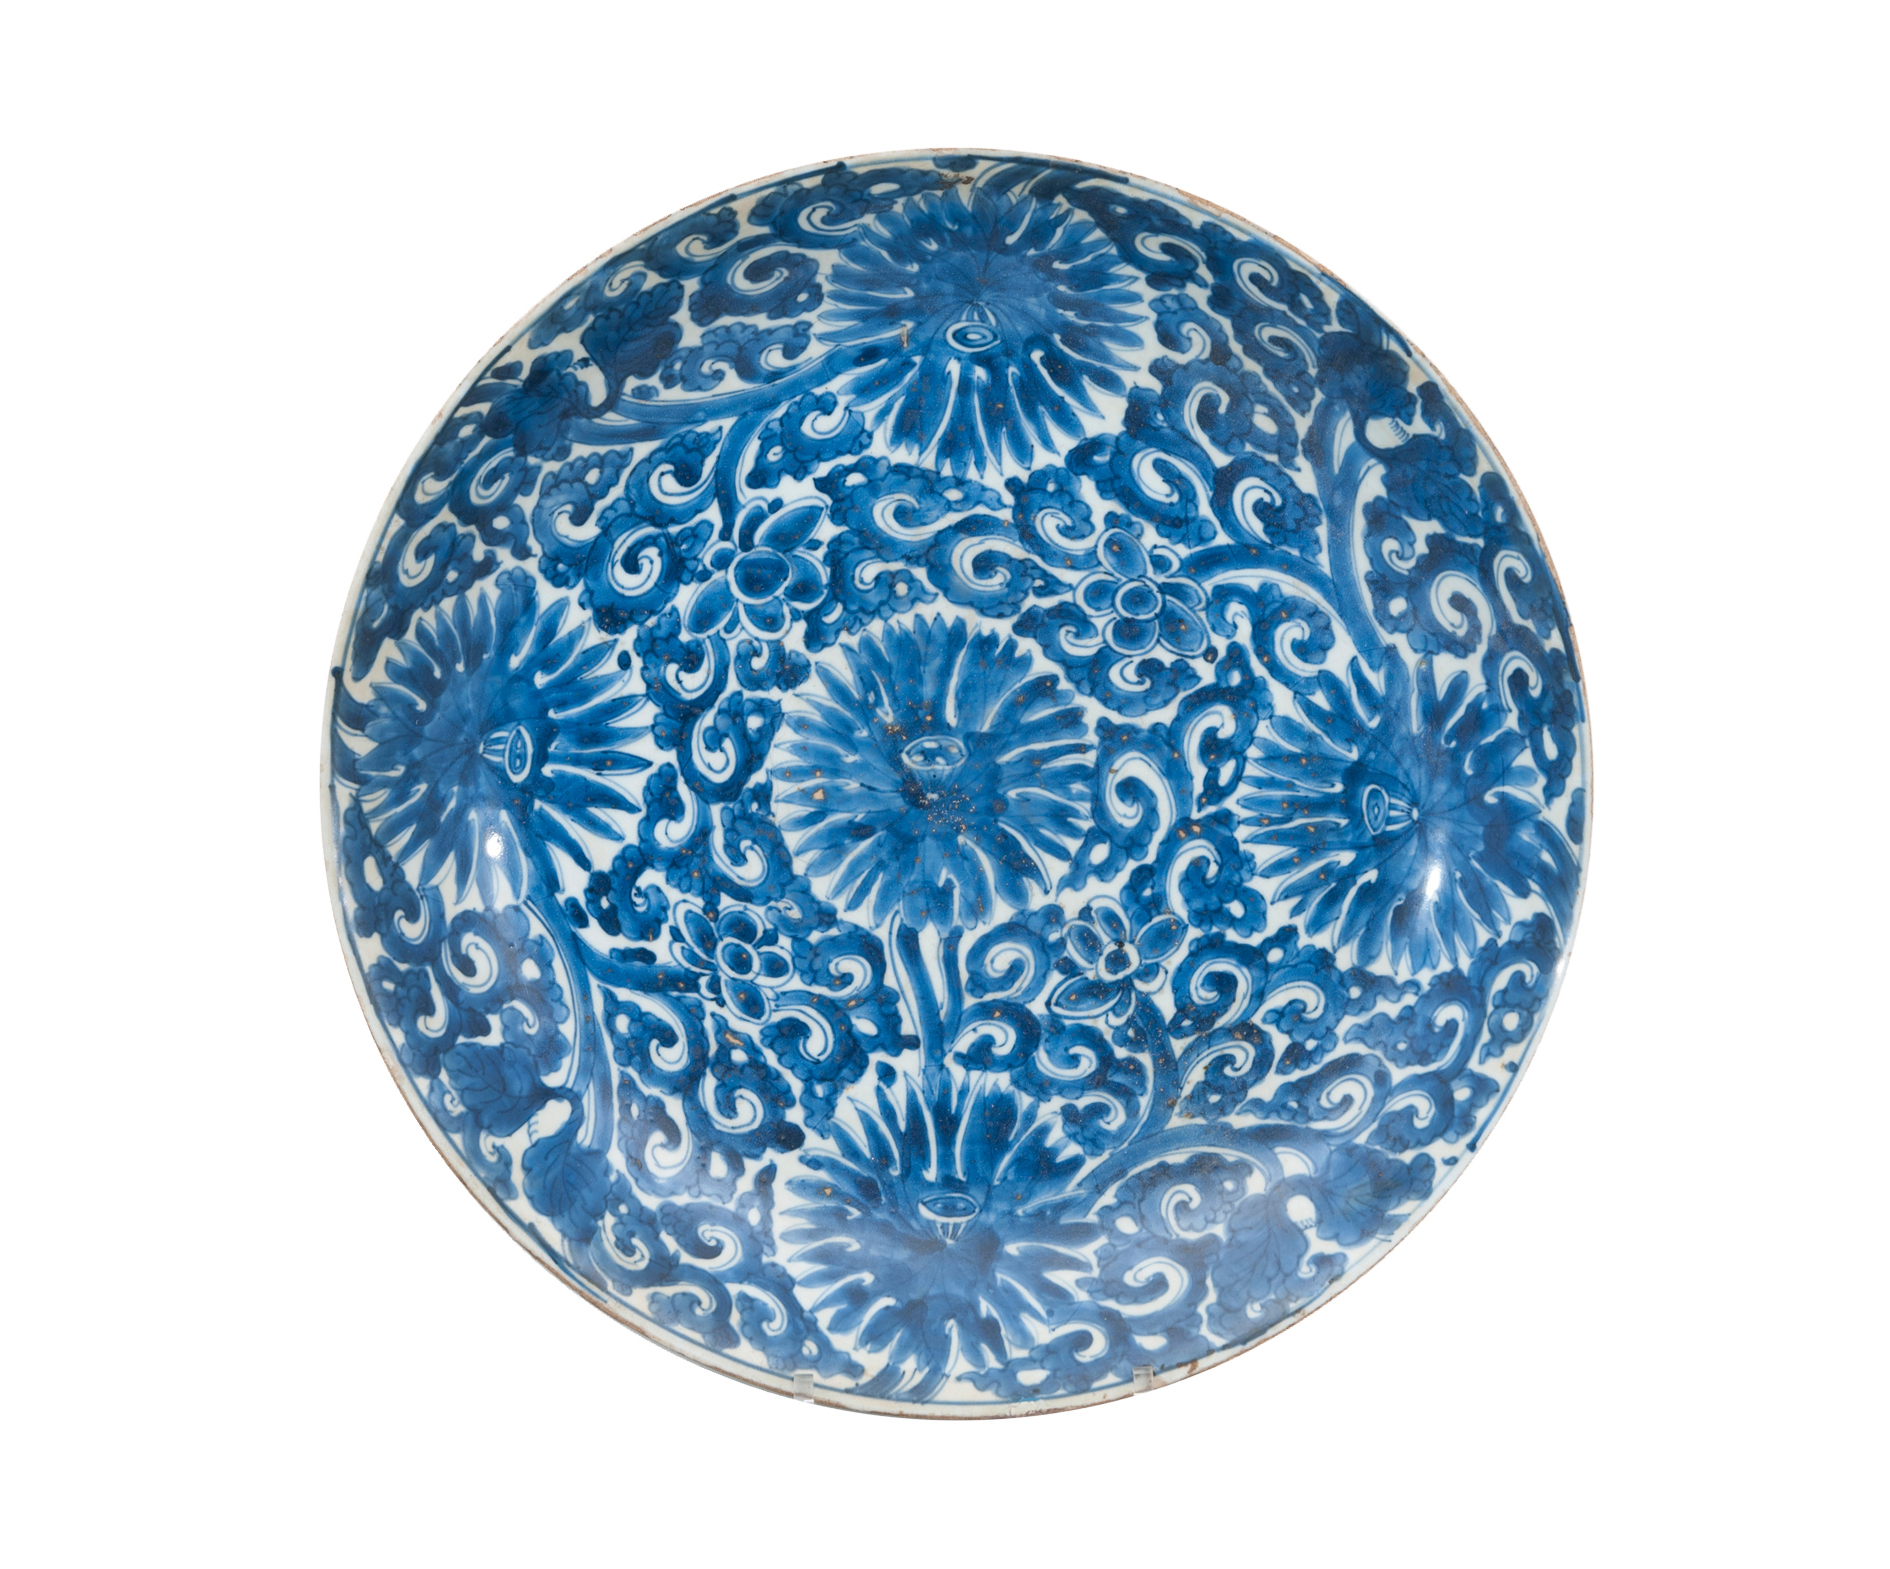 A large plate with chrysanthemum flowers - image 2